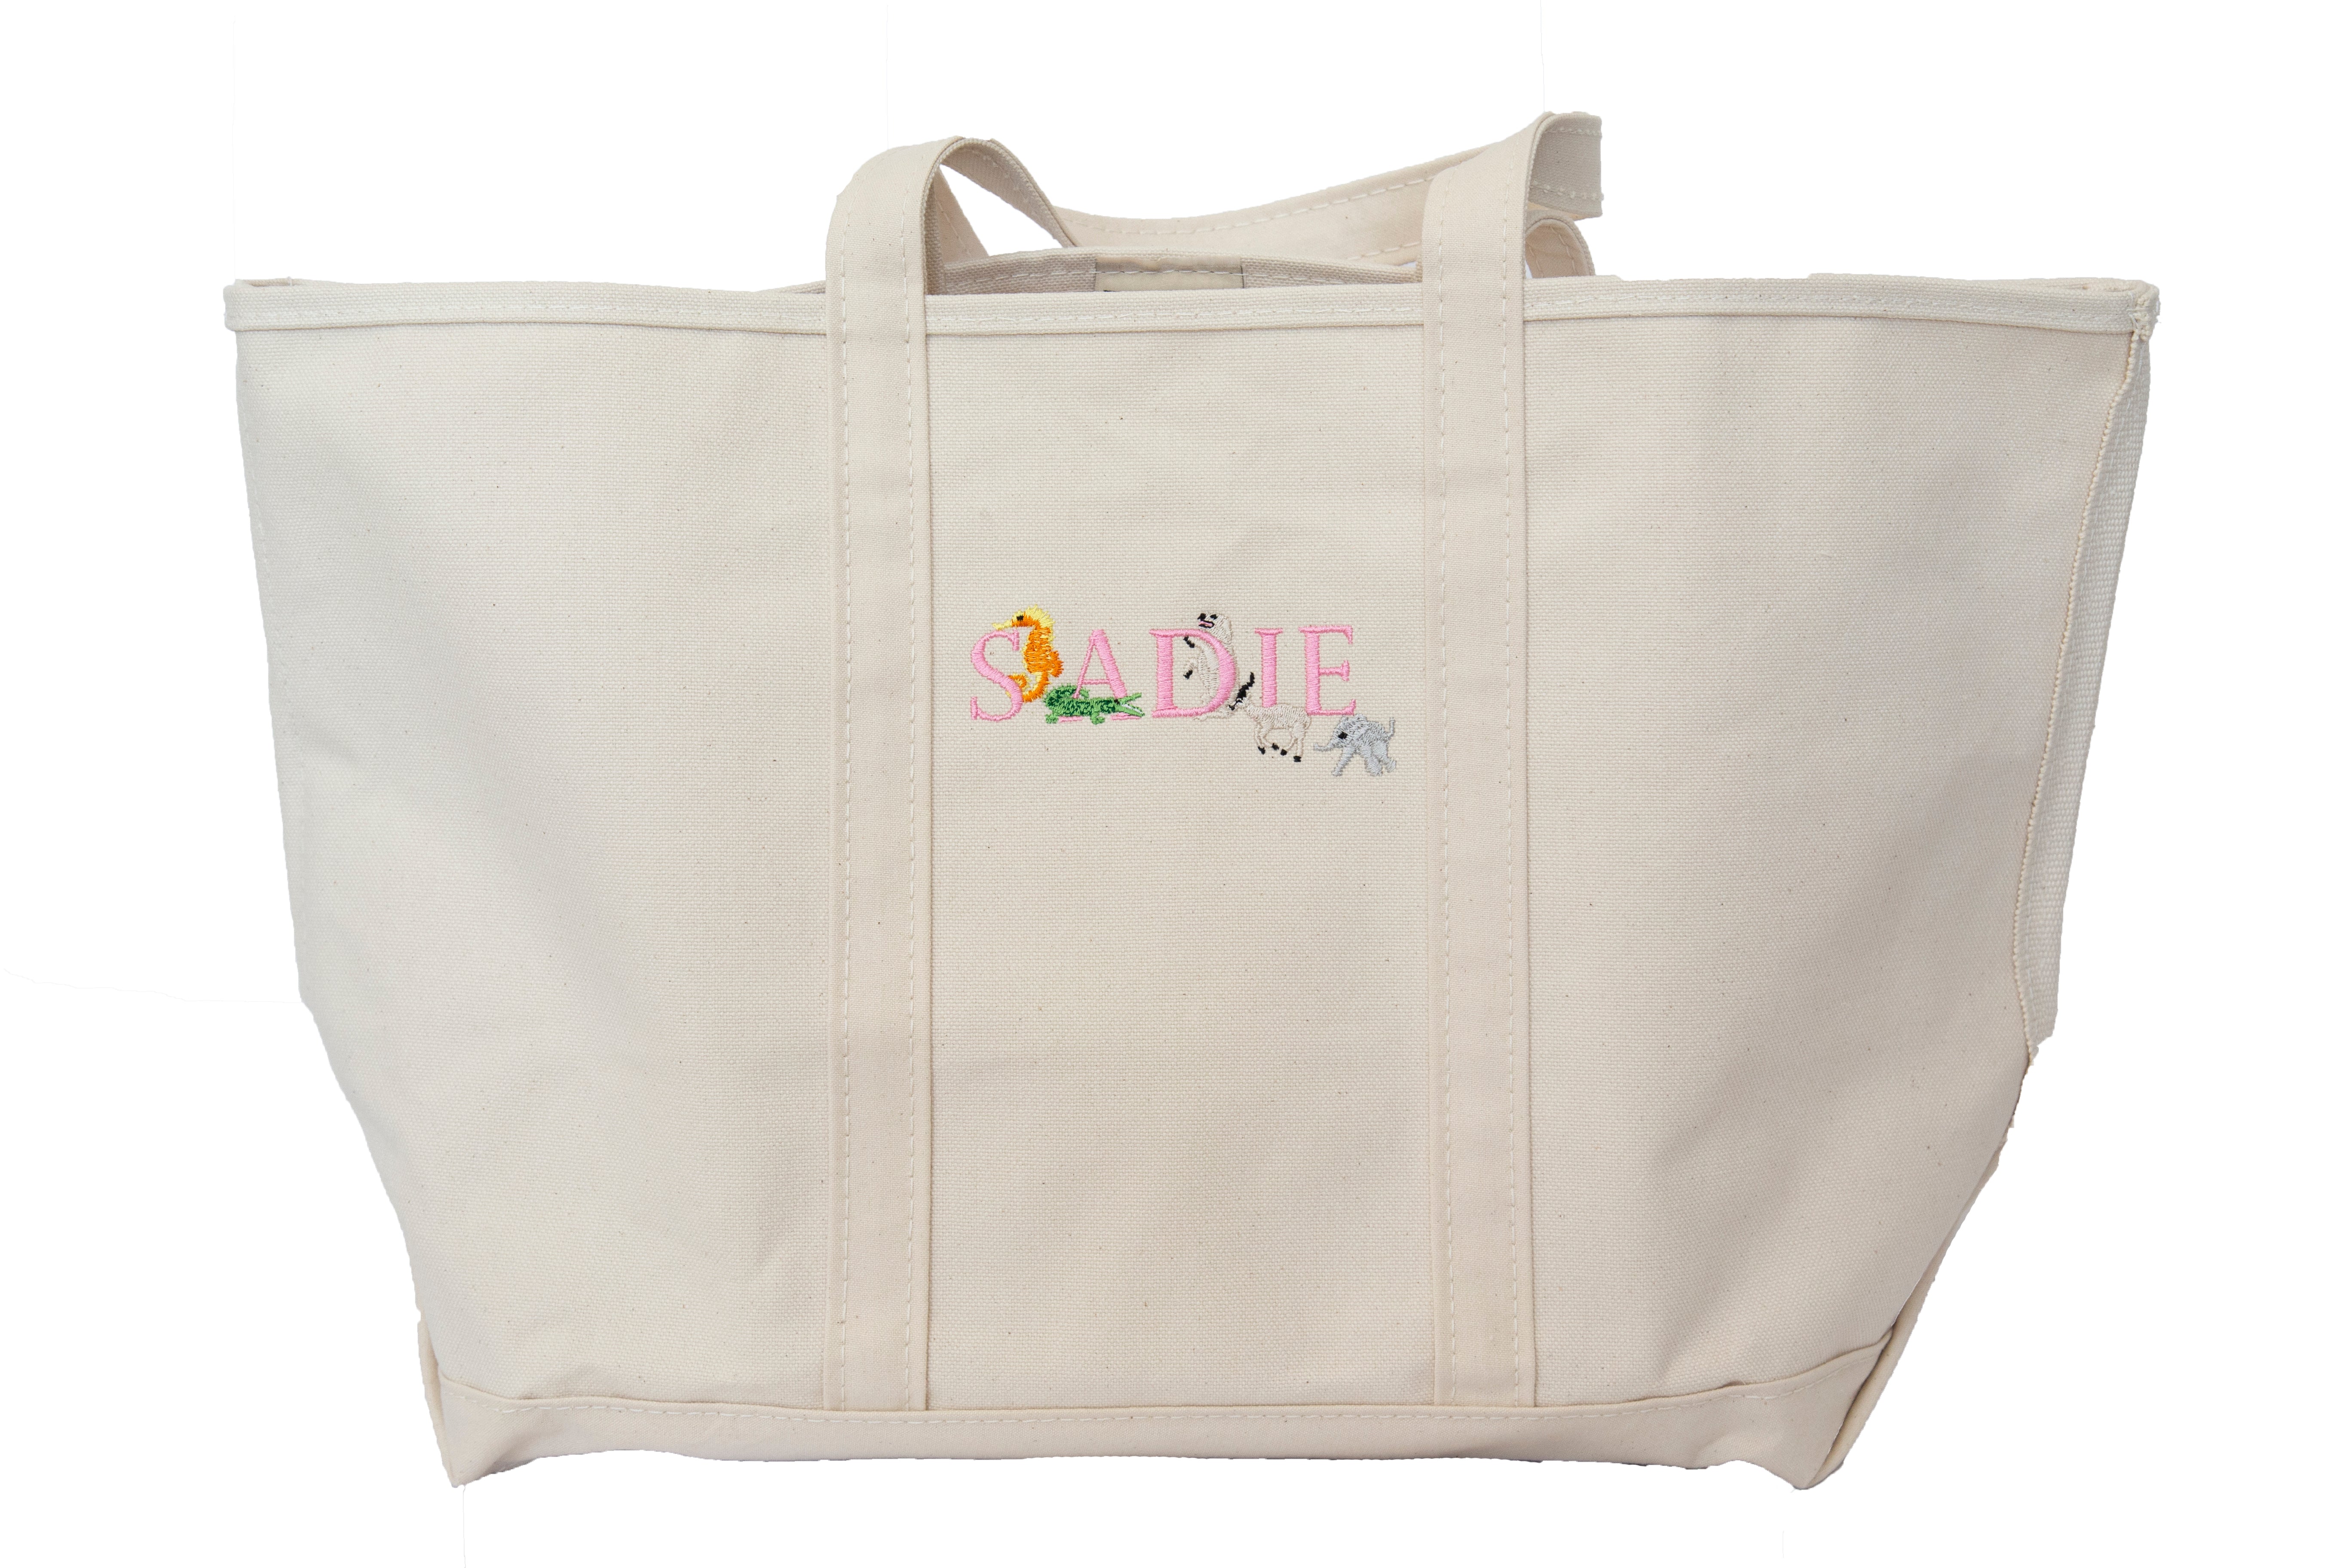 Customized, Embroidered Tote Bag